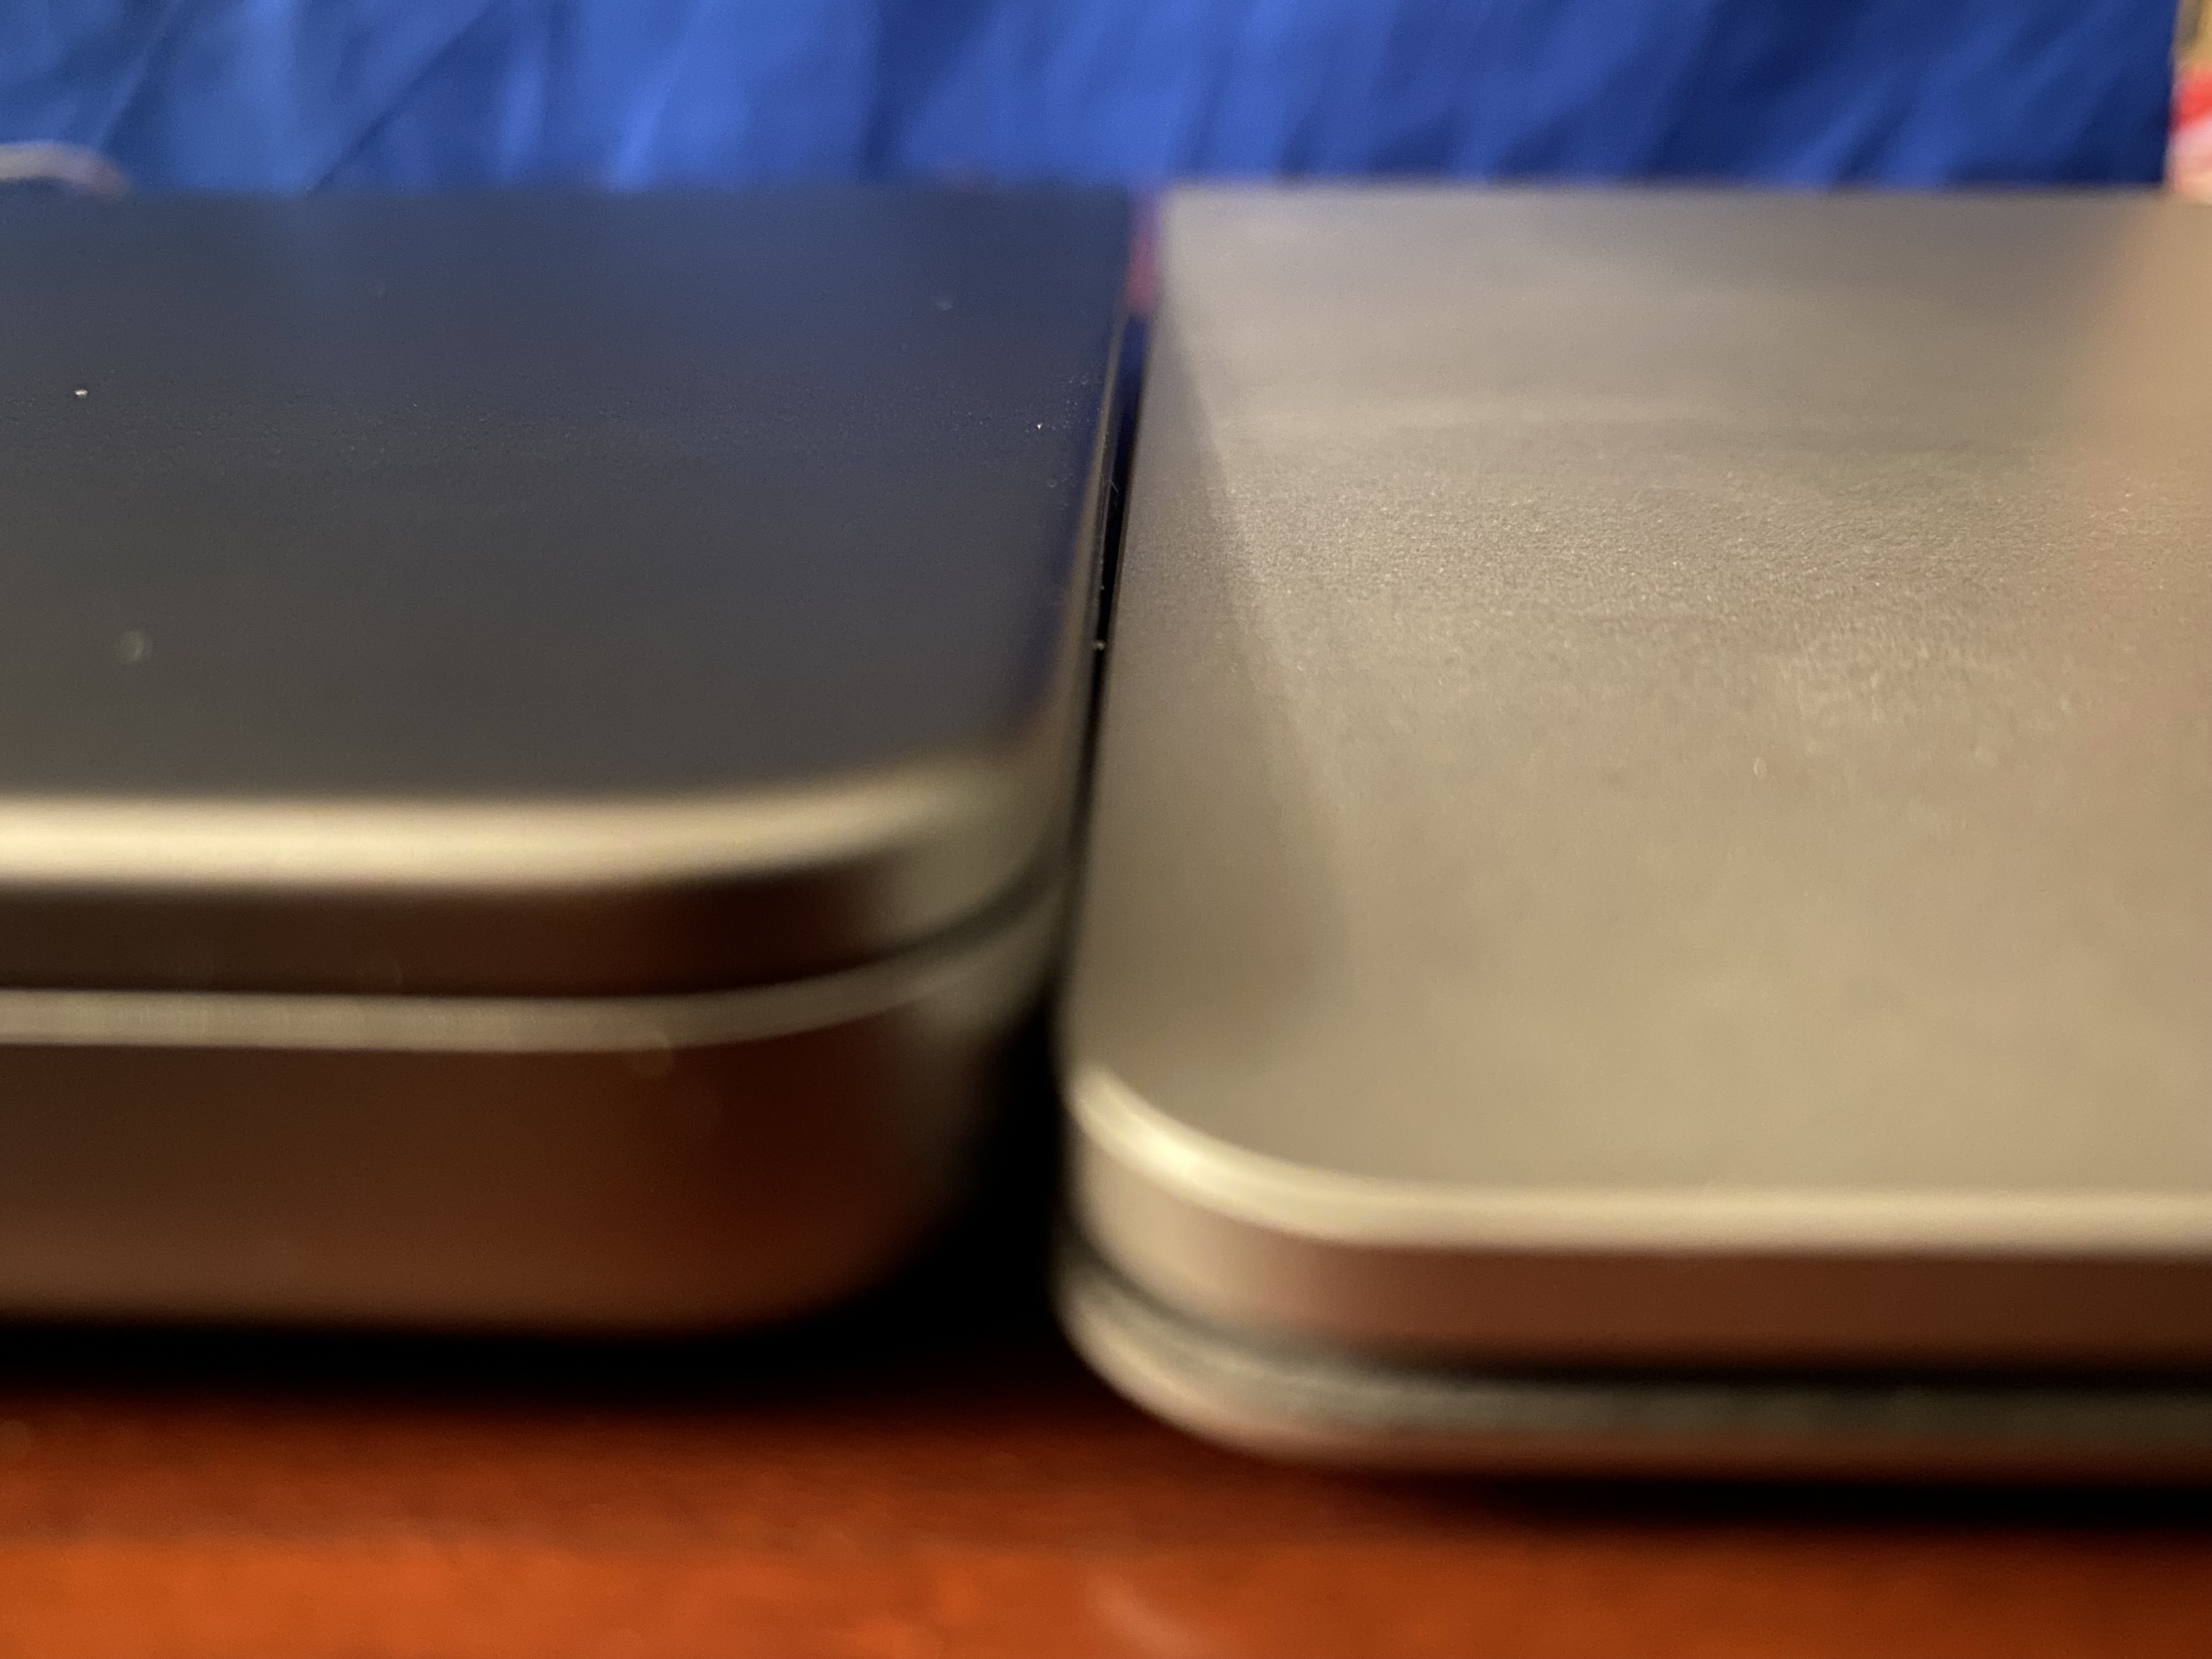 Comparison between the MBP and SL3, MBP on the left